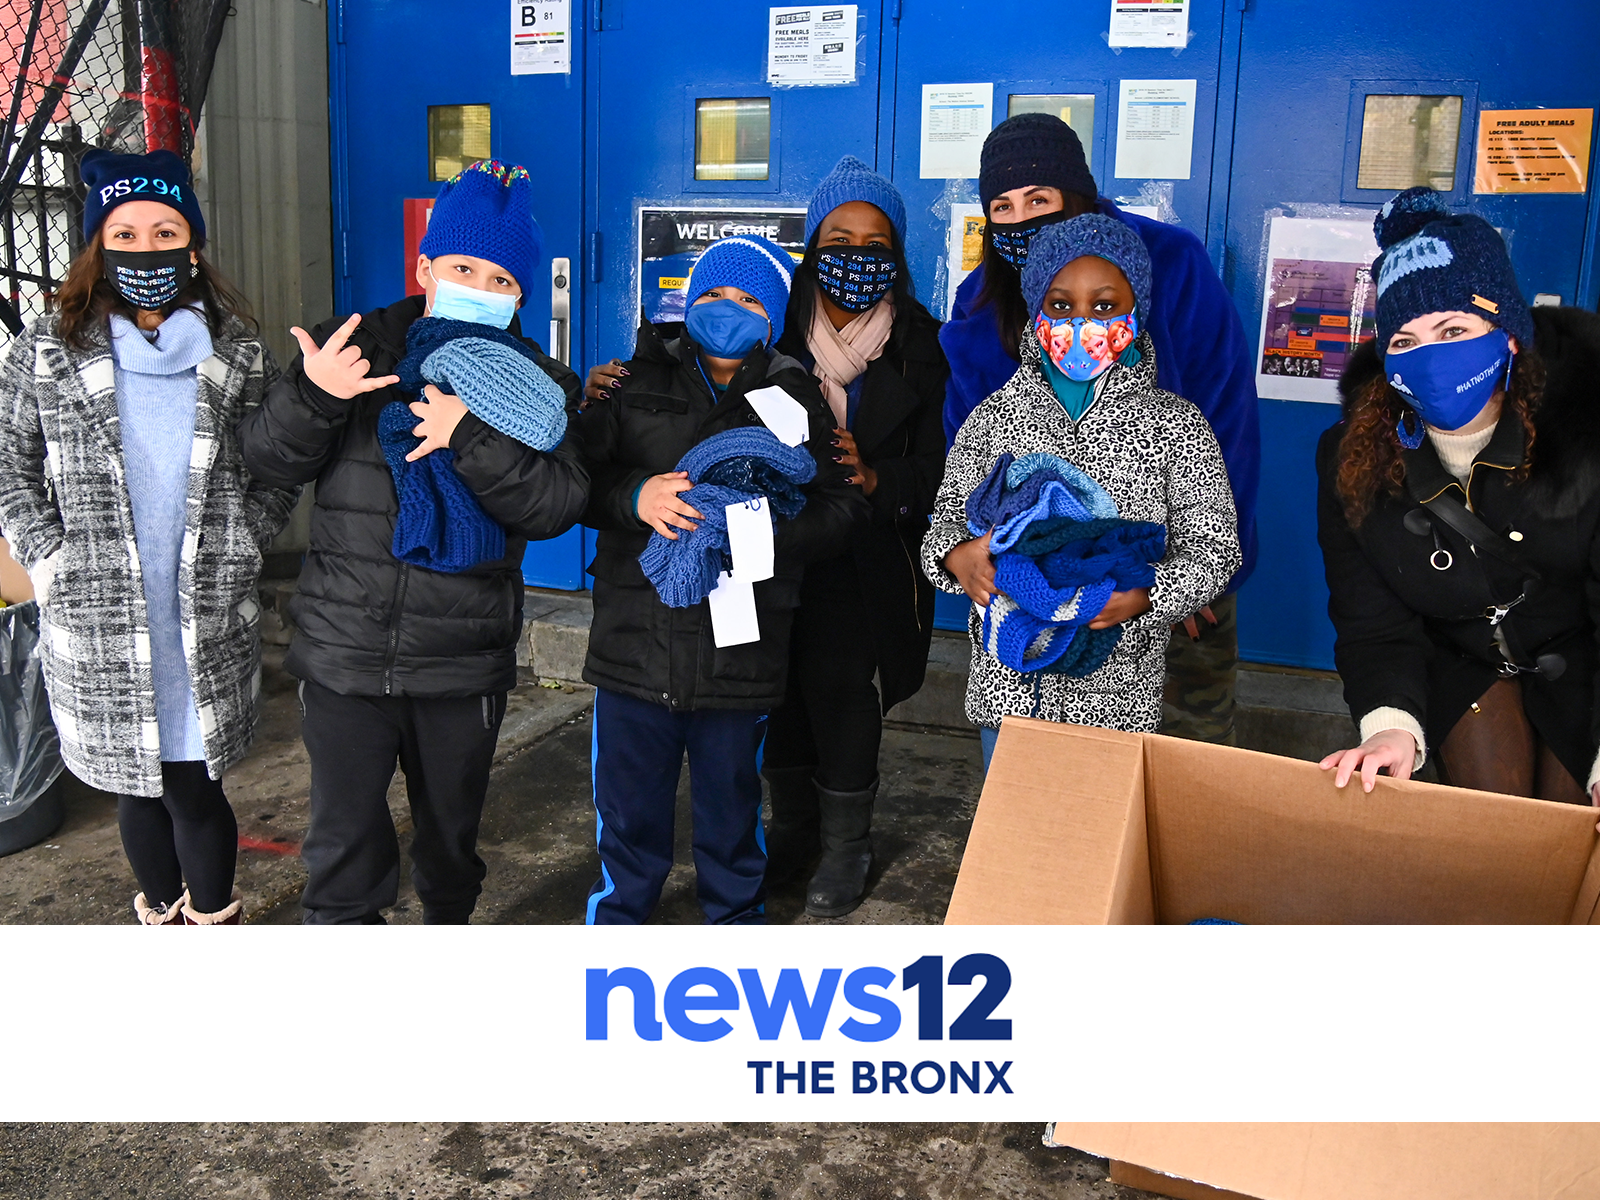 News12 Bronx still frame of students in blue hats